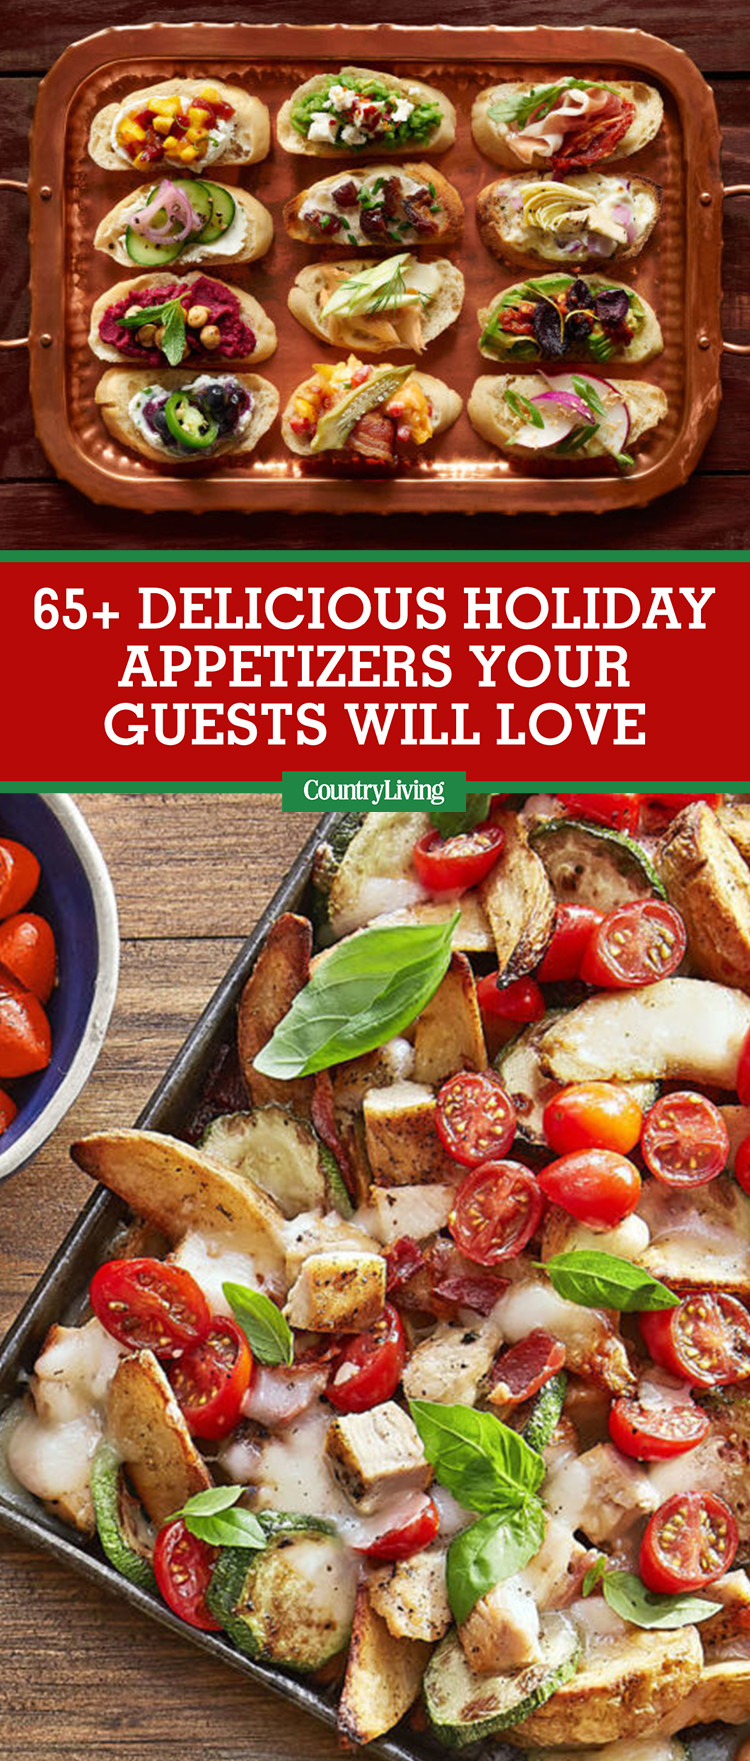 Christmas Recipes Appetizers
 60 Easy Thanksgiving and Christmas Appetizer Recipes